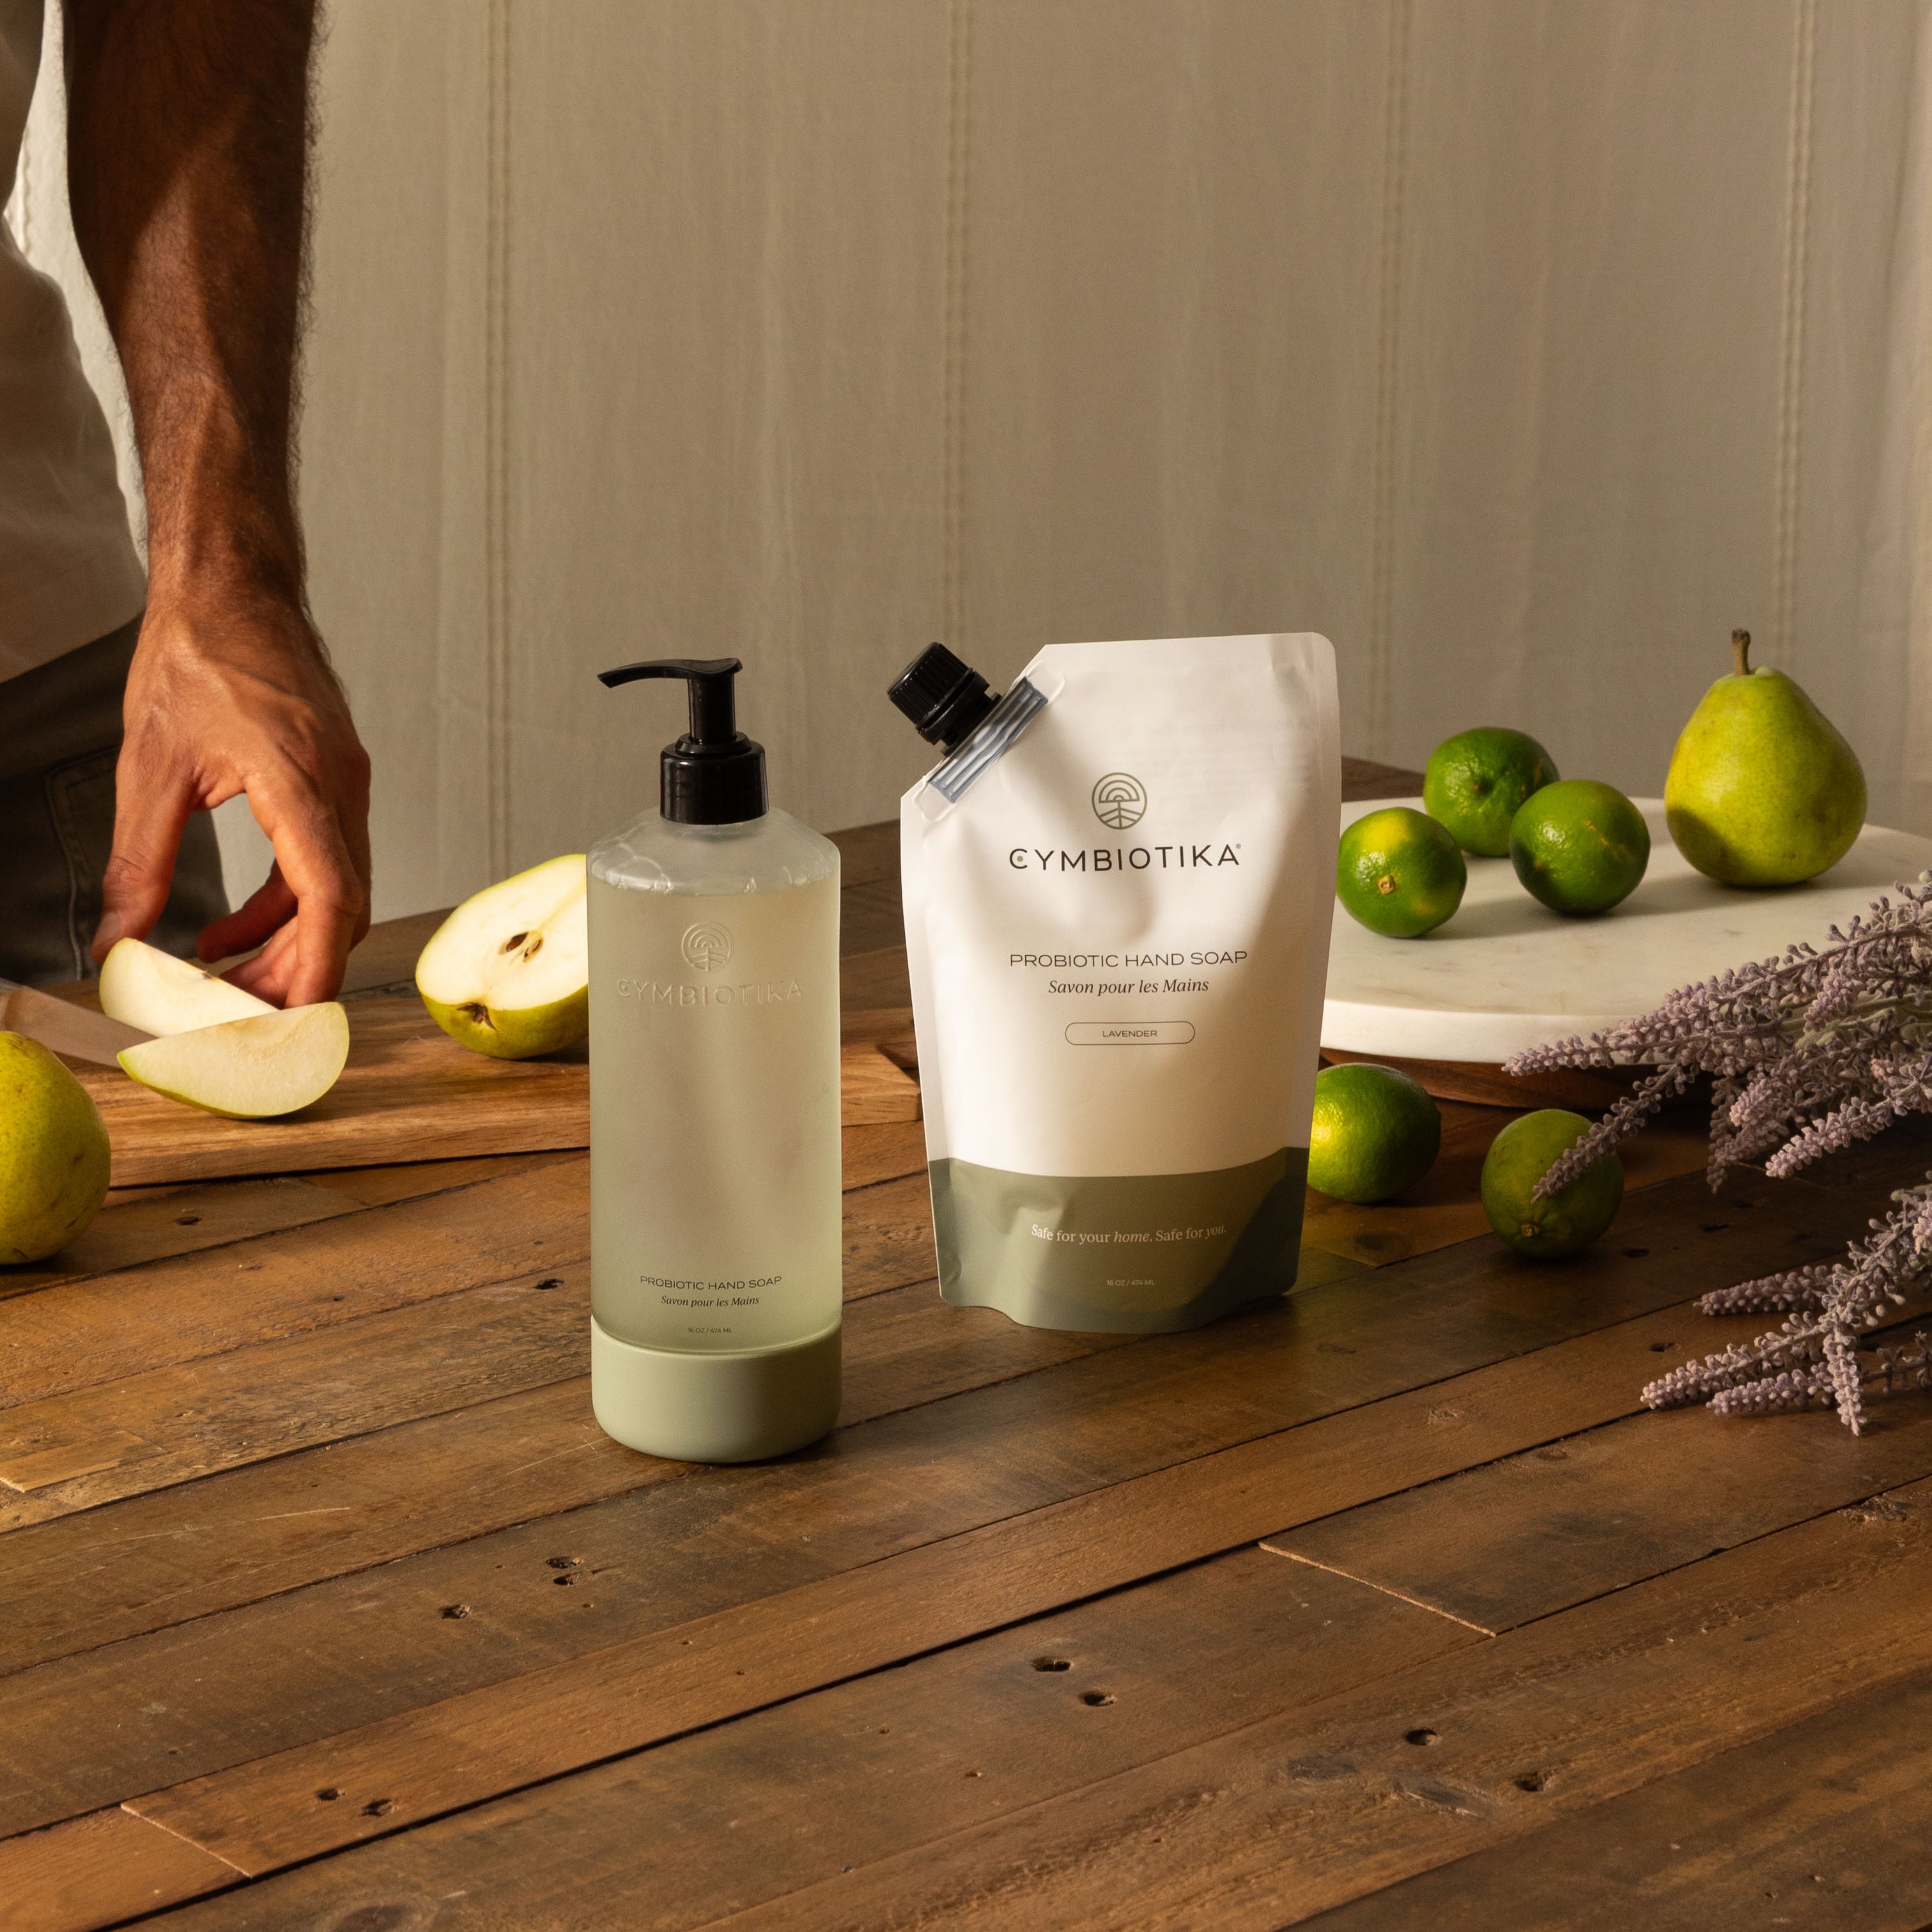 Probiotic Hand Soap Kit On Counter Next to Pear being Cut